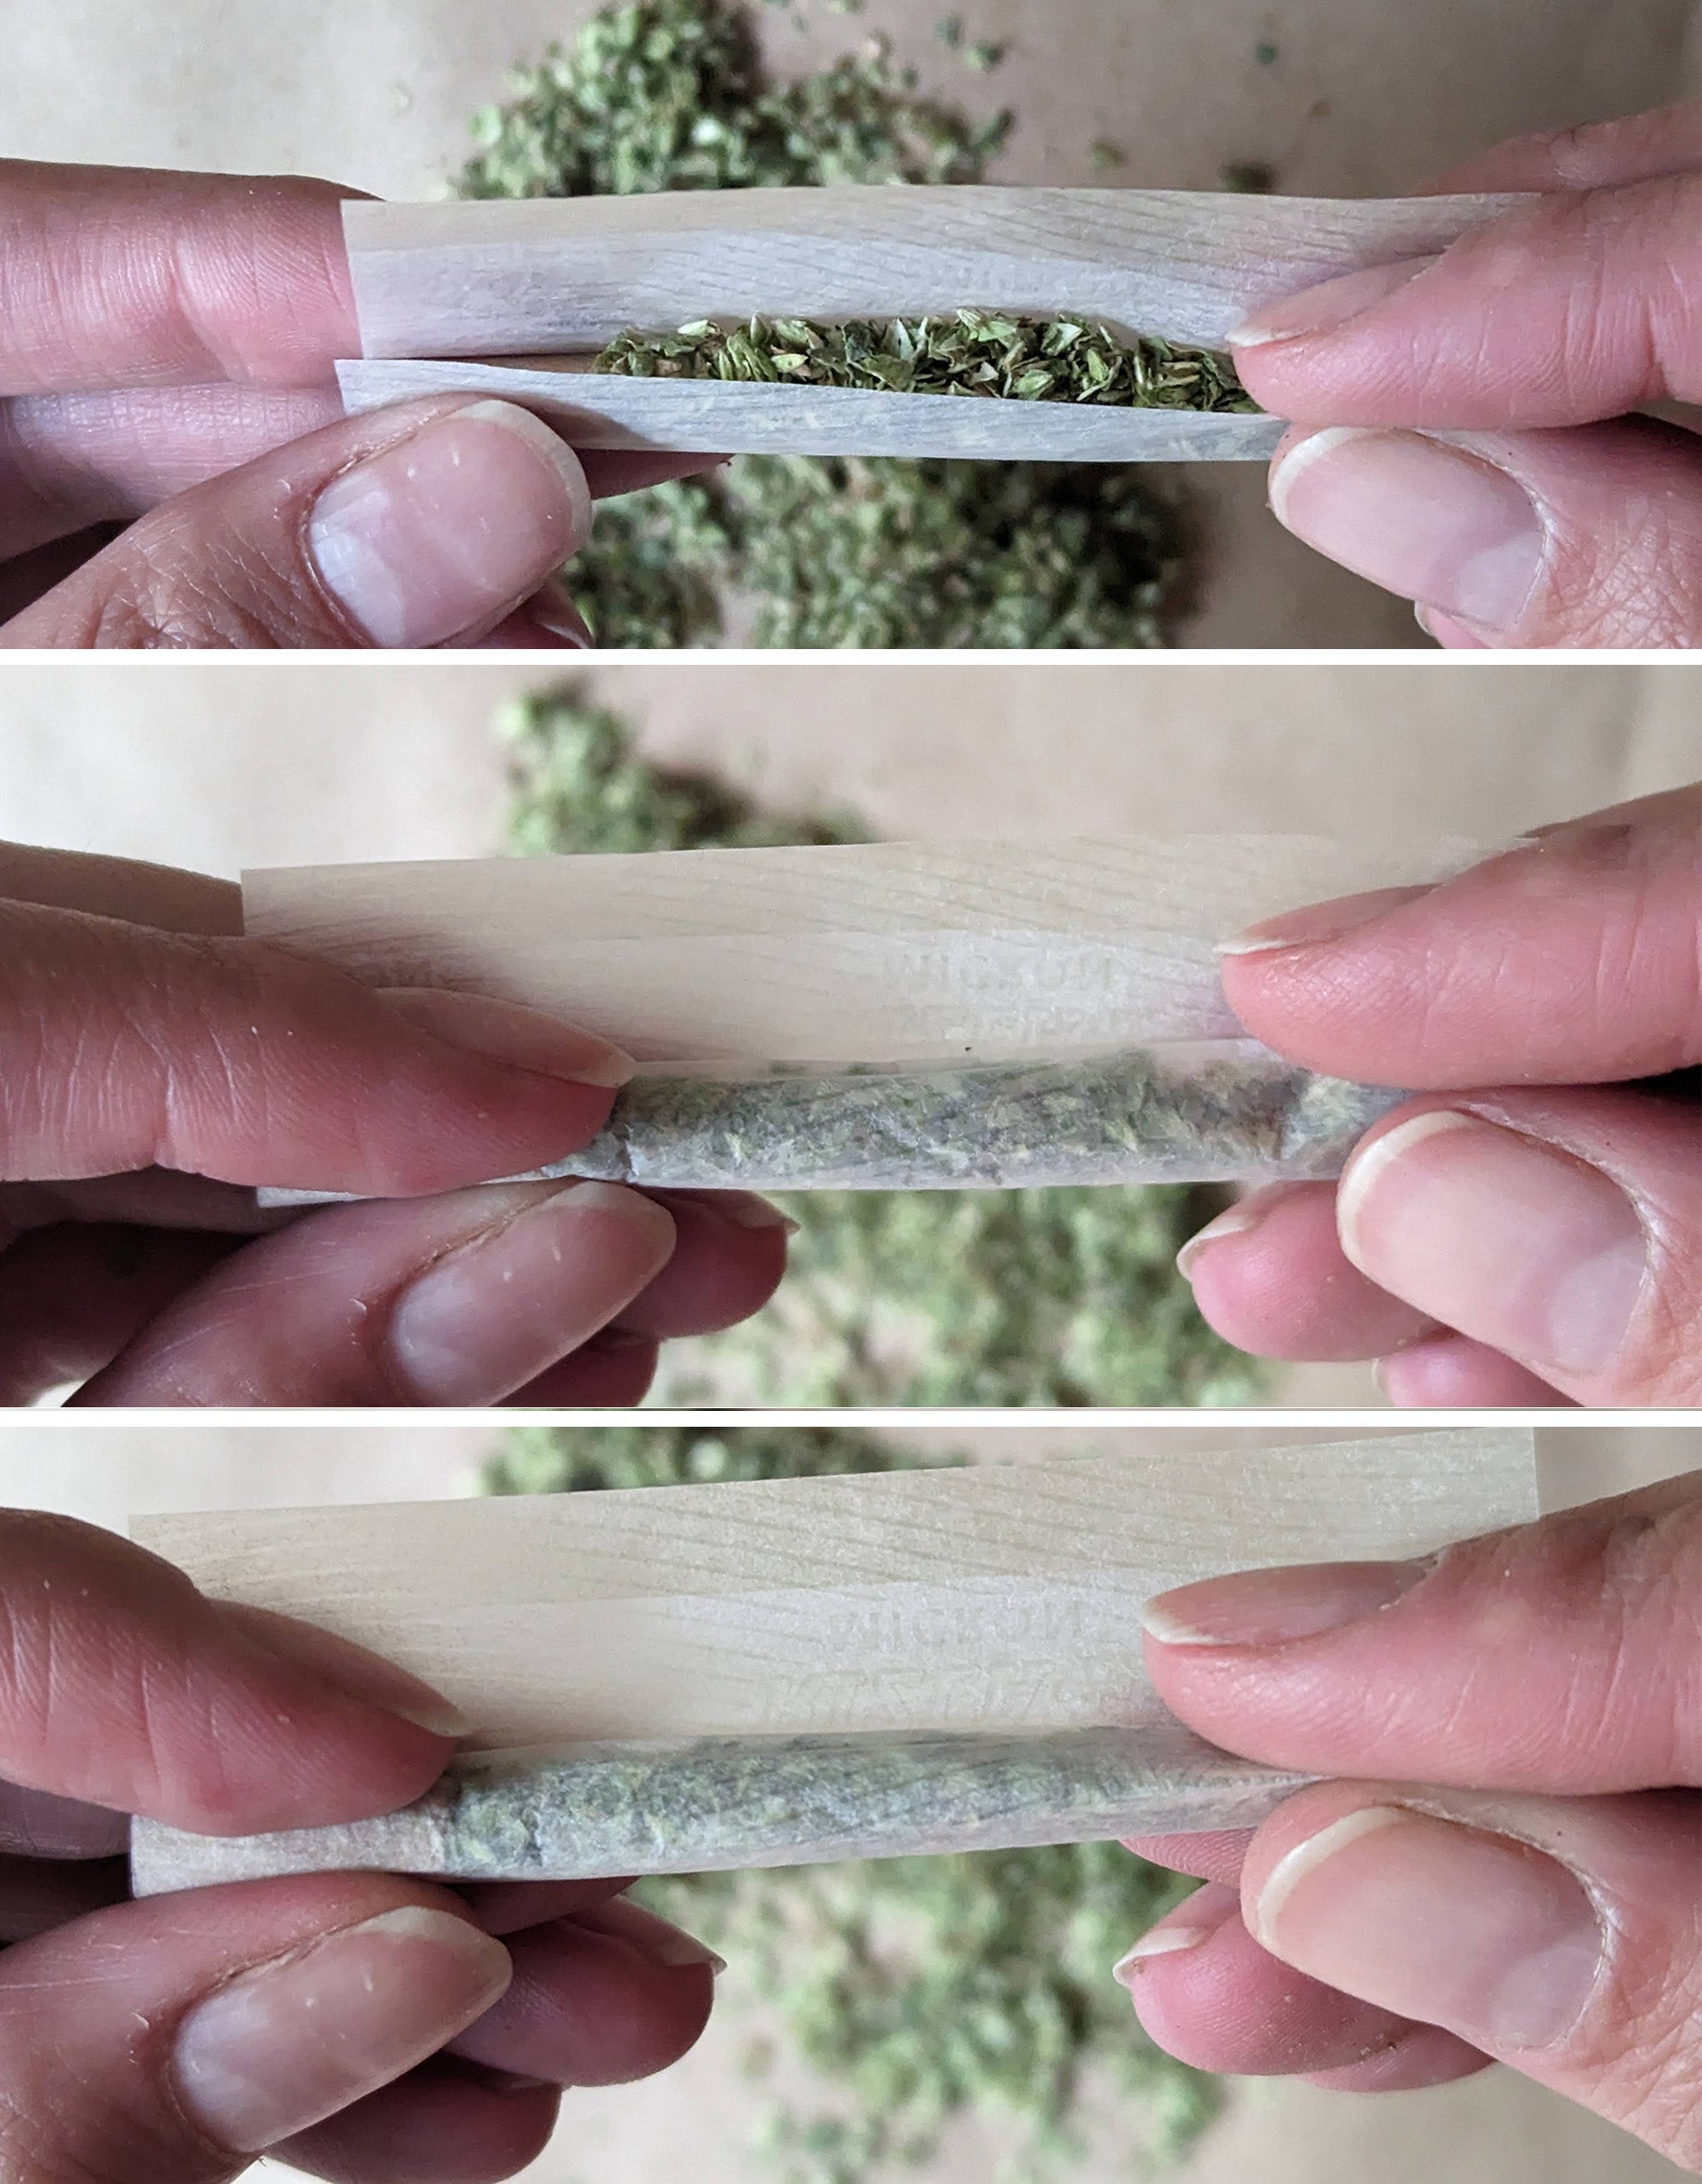 Series of three photos showing how to roll a joint. 